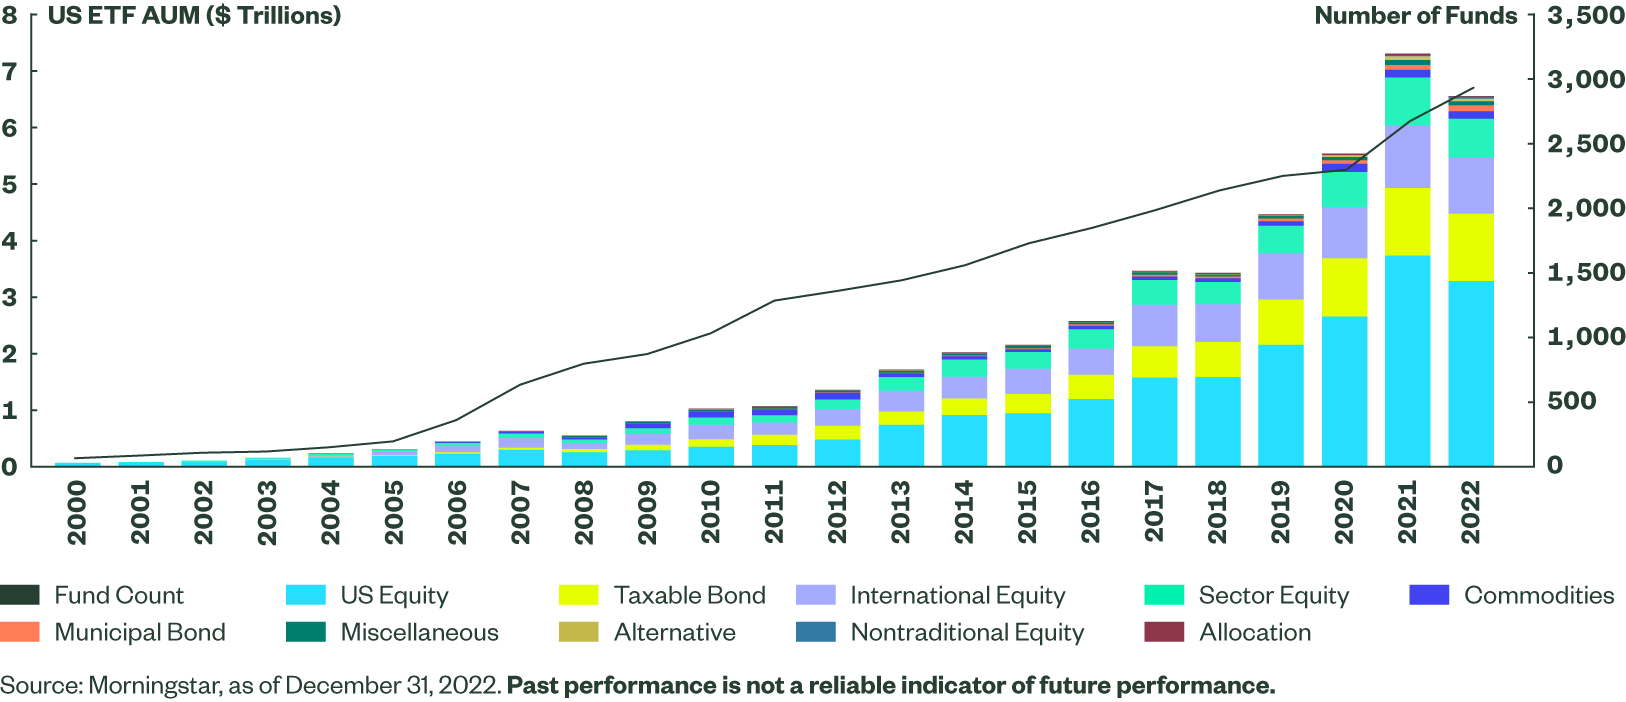 The Impressive Growth of the ETF, 2000 to 2022 